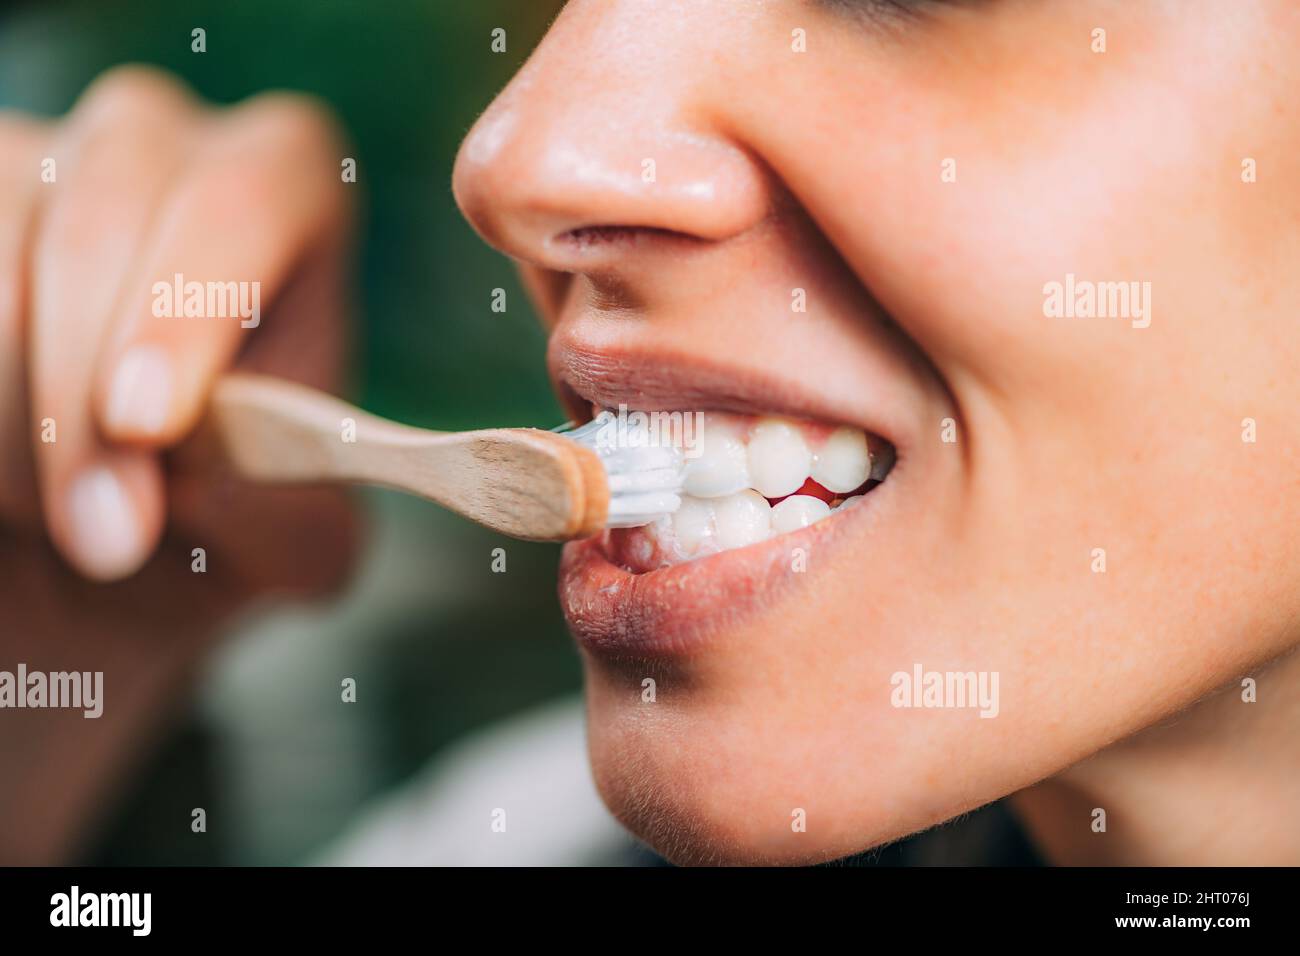 Woman brushing teeth with charcoal toothpaste Stock Photo